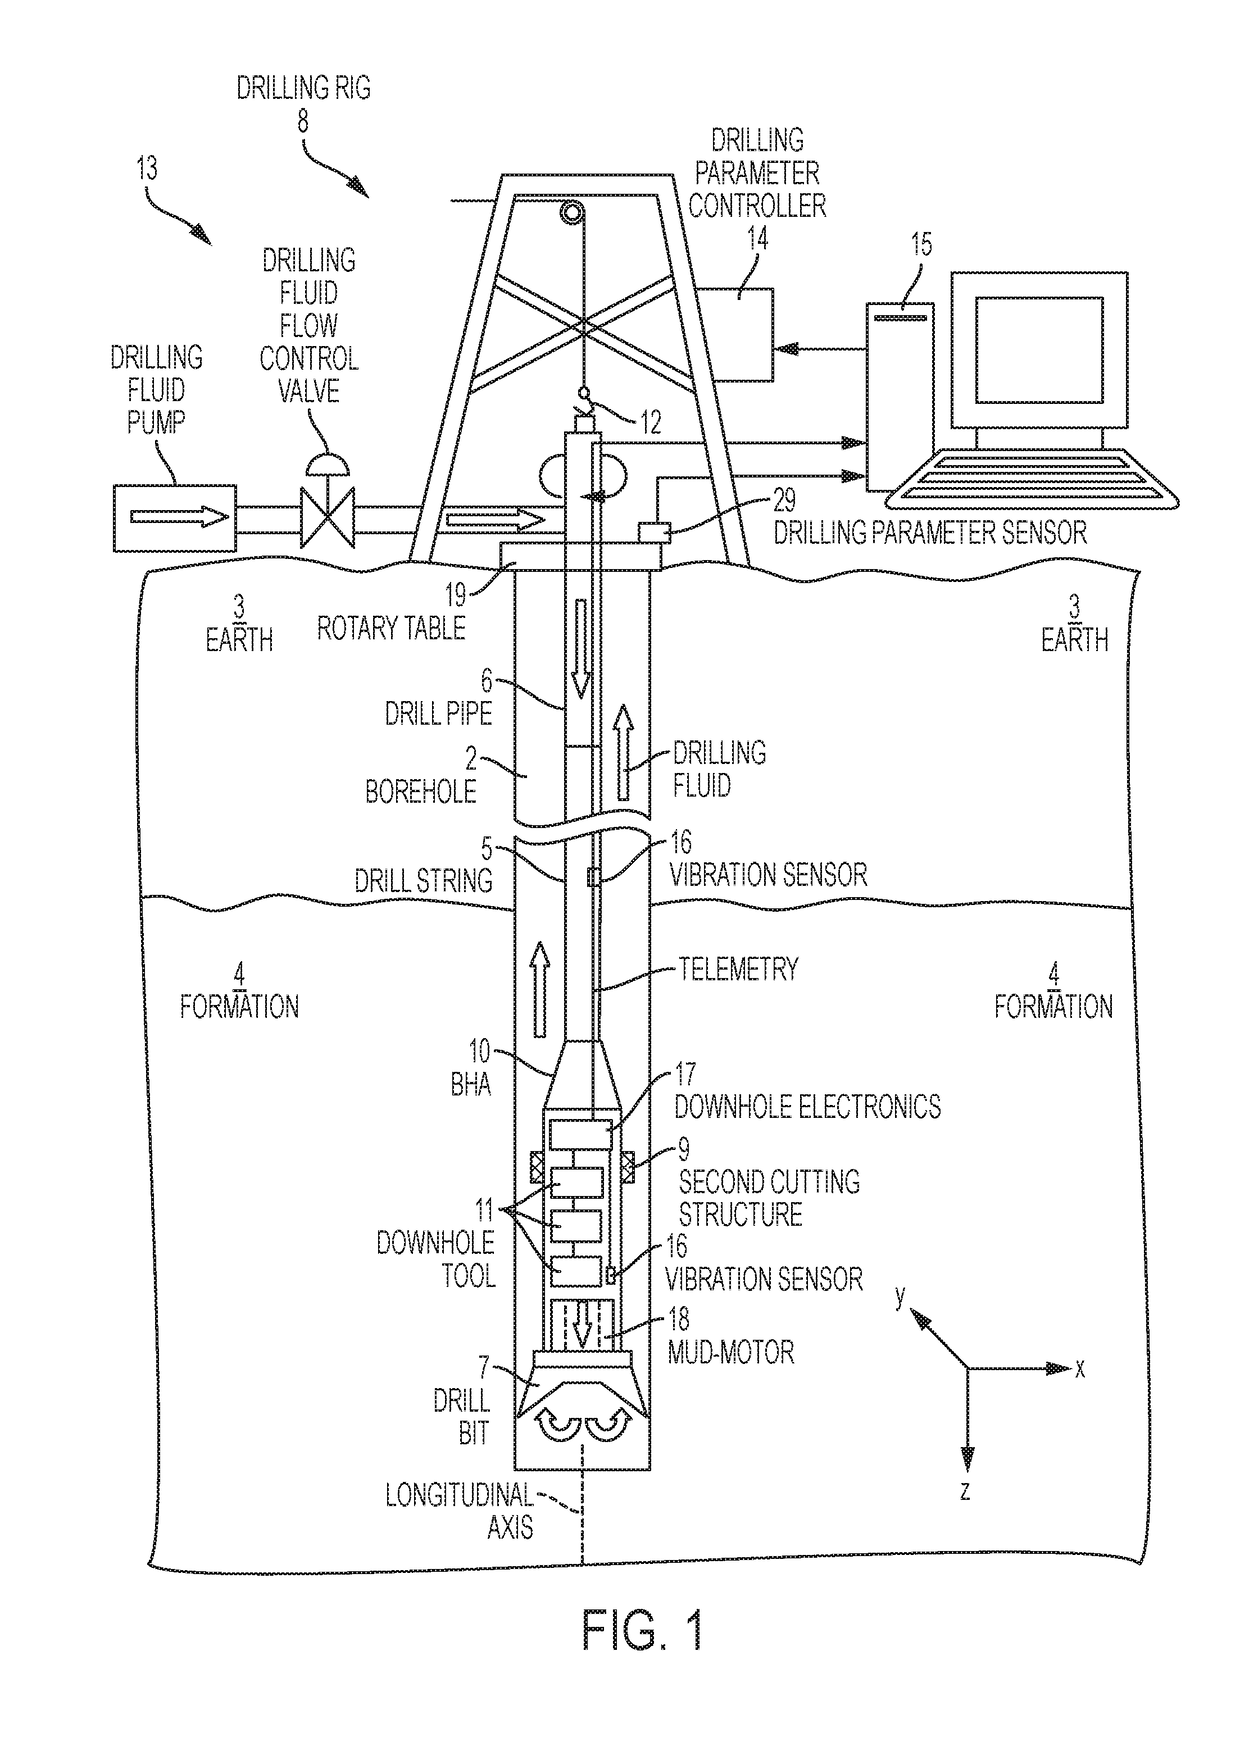 Normalized status variables for vibration management of drill strings